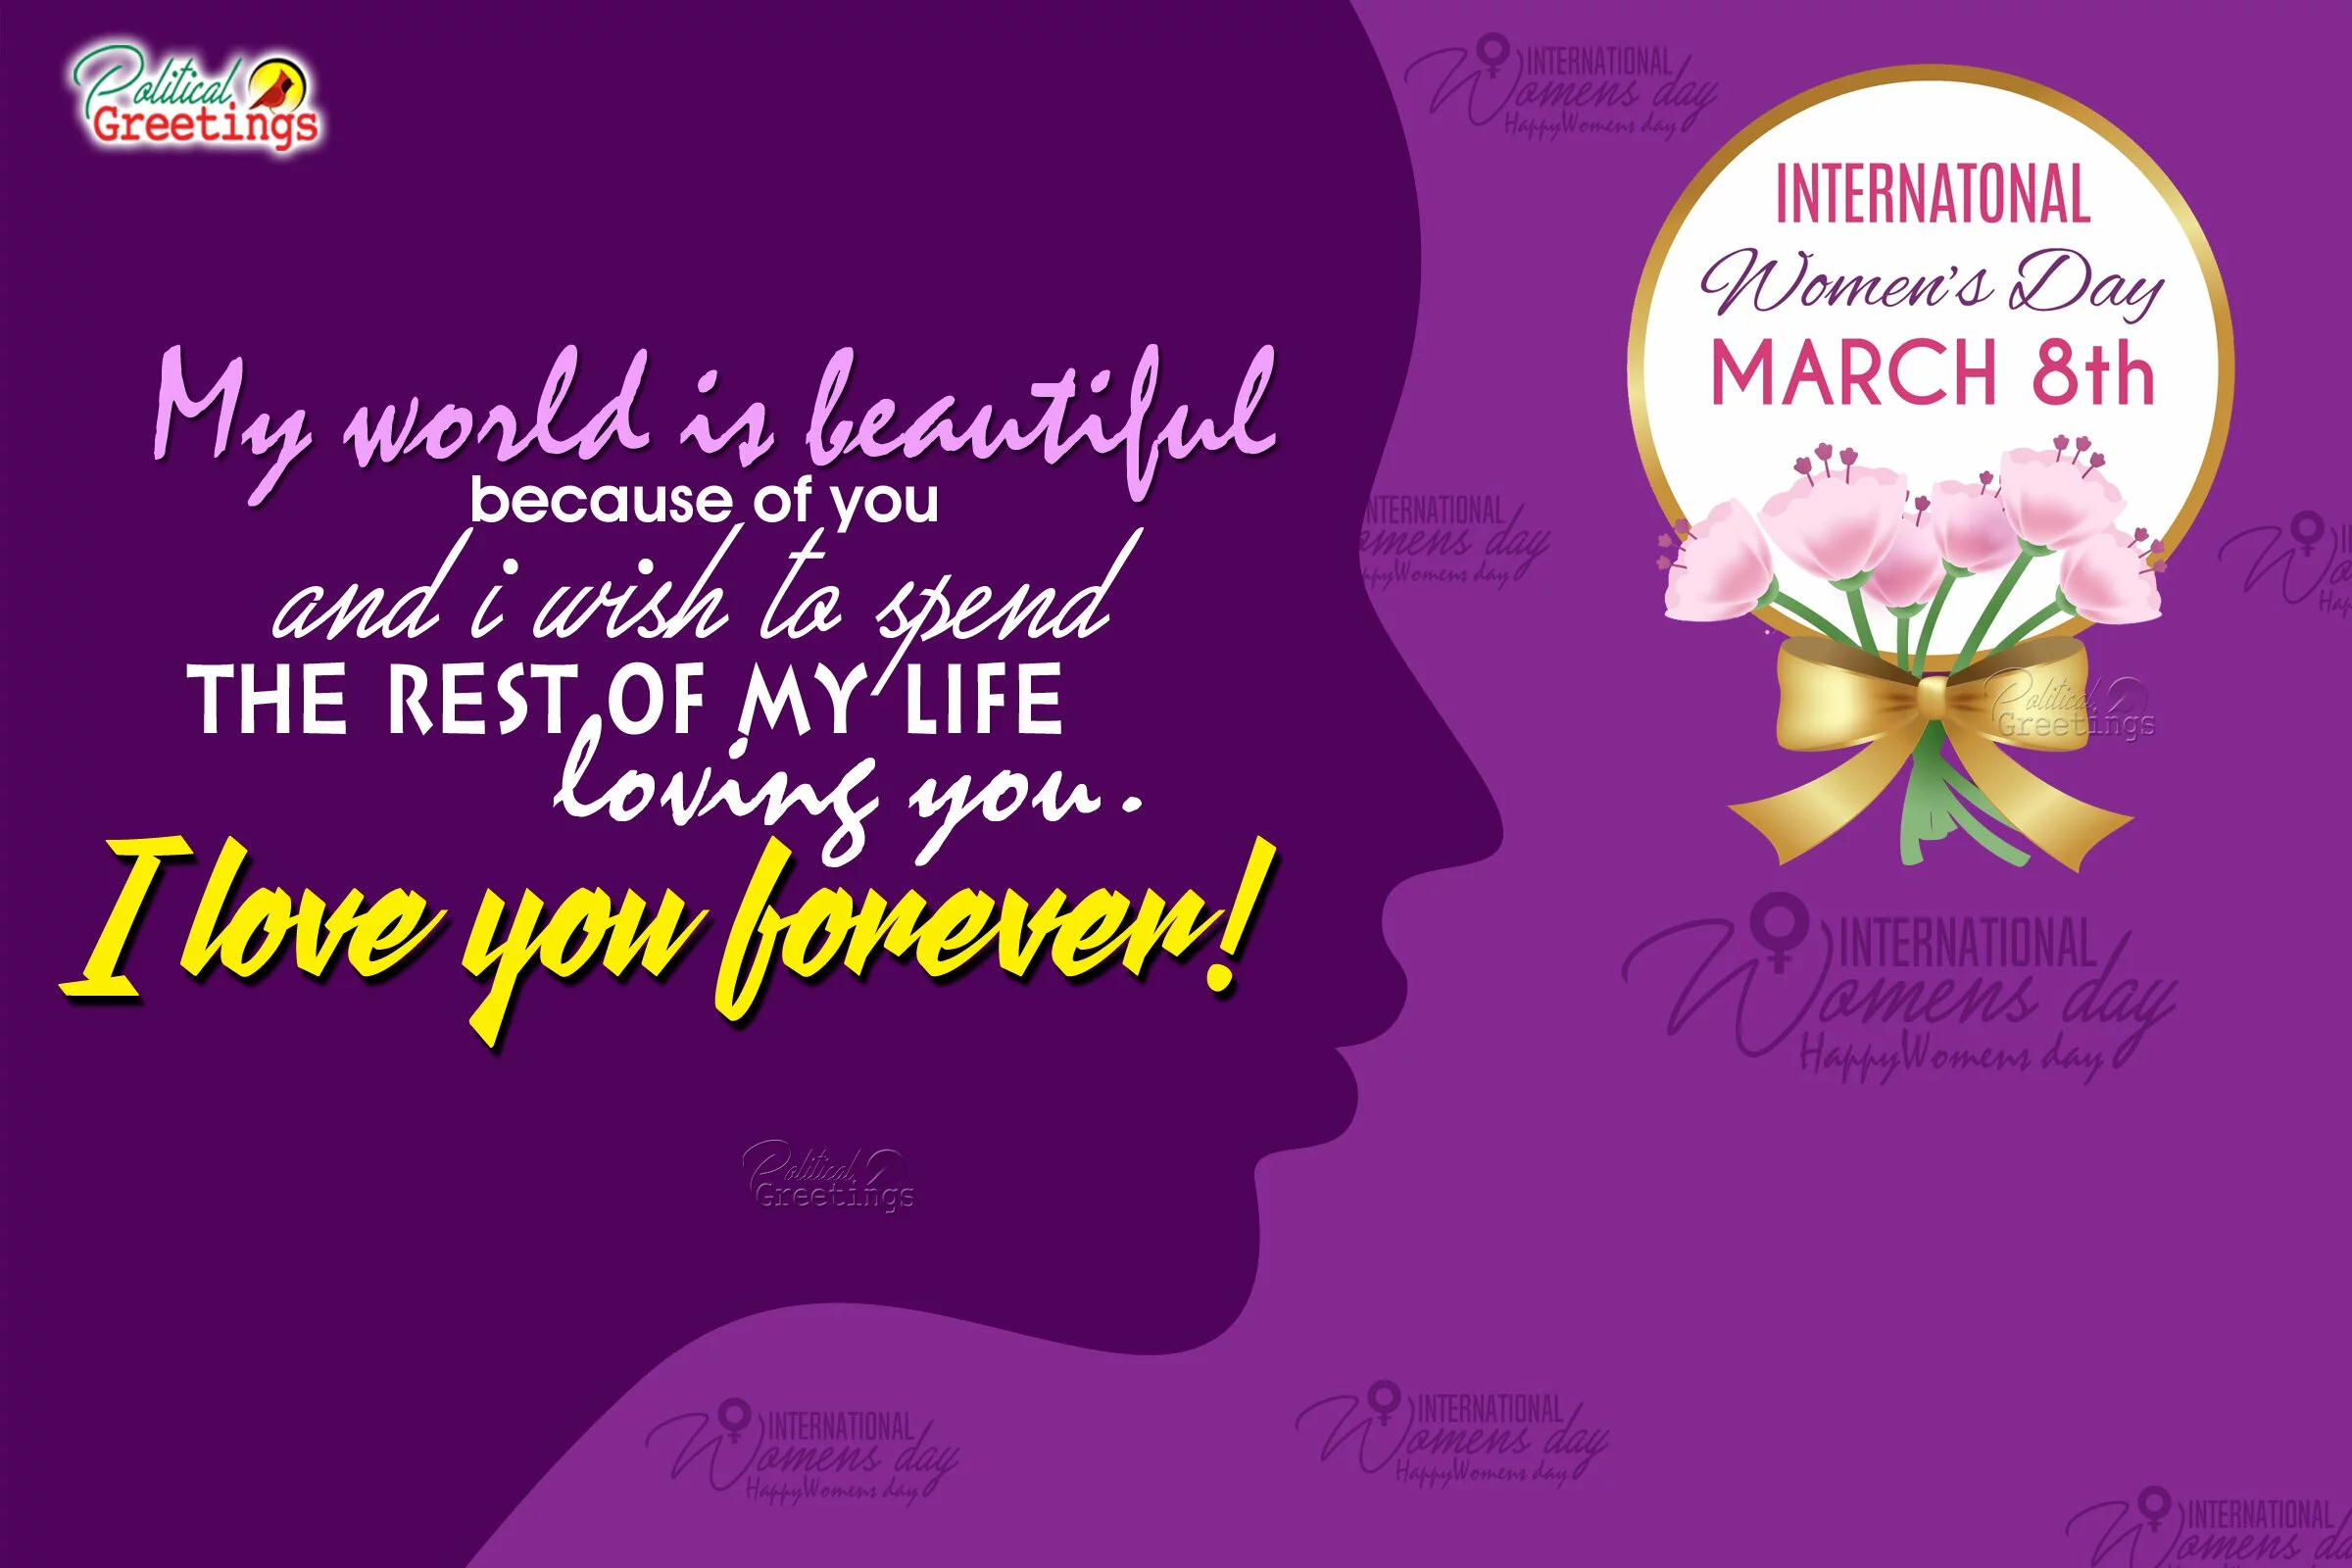 Happy women's day 2018 - Wishes,Images,quotes,messages 2018